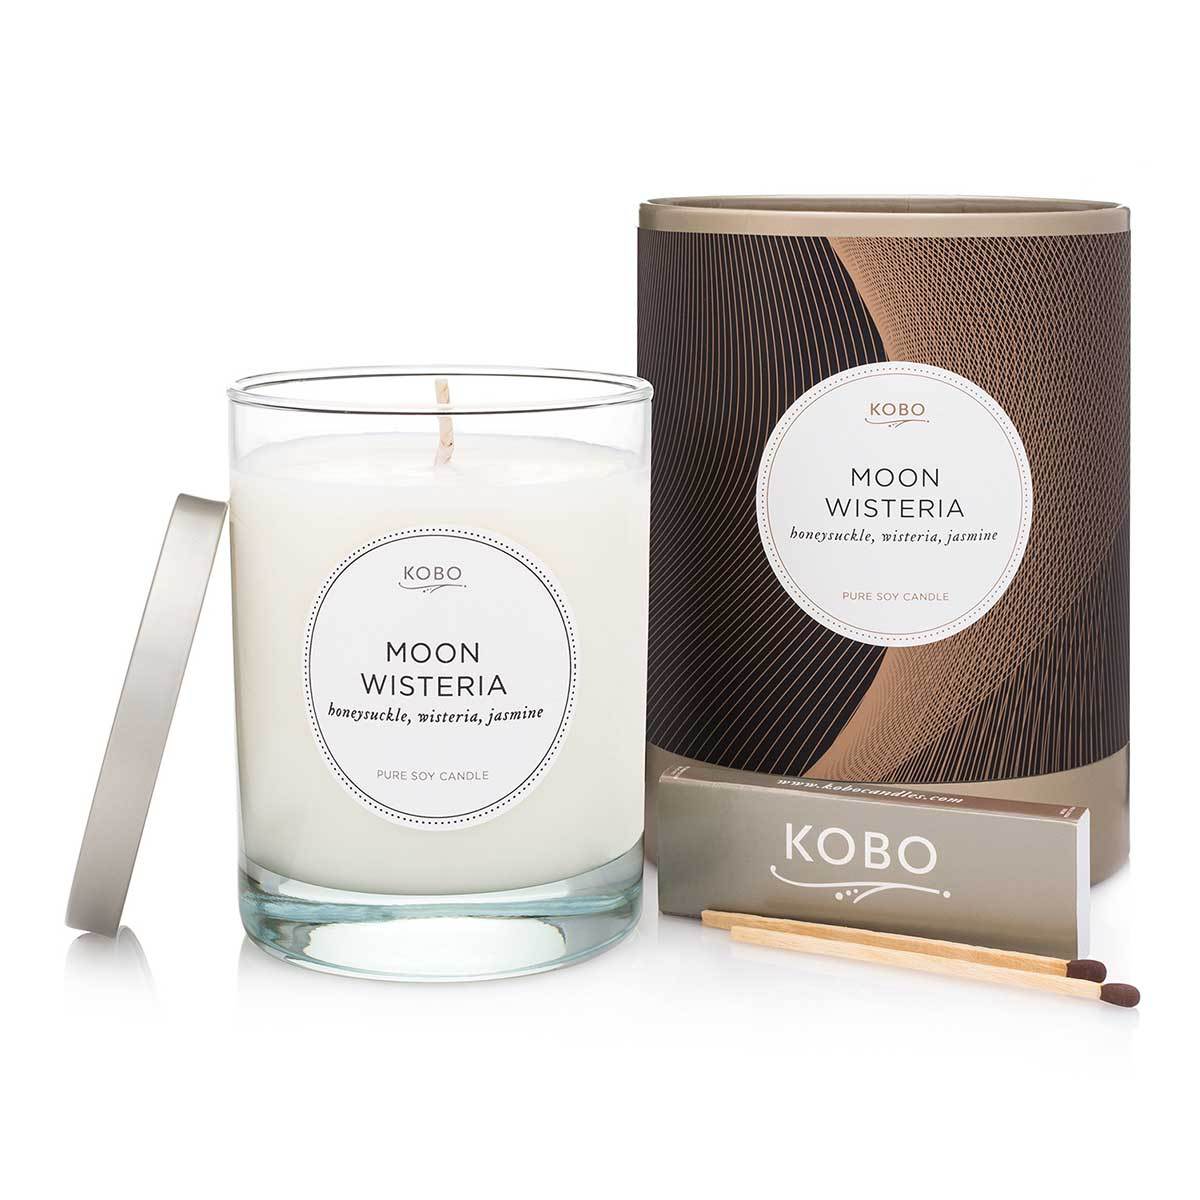 Primary image of Moon Wisteria Candle